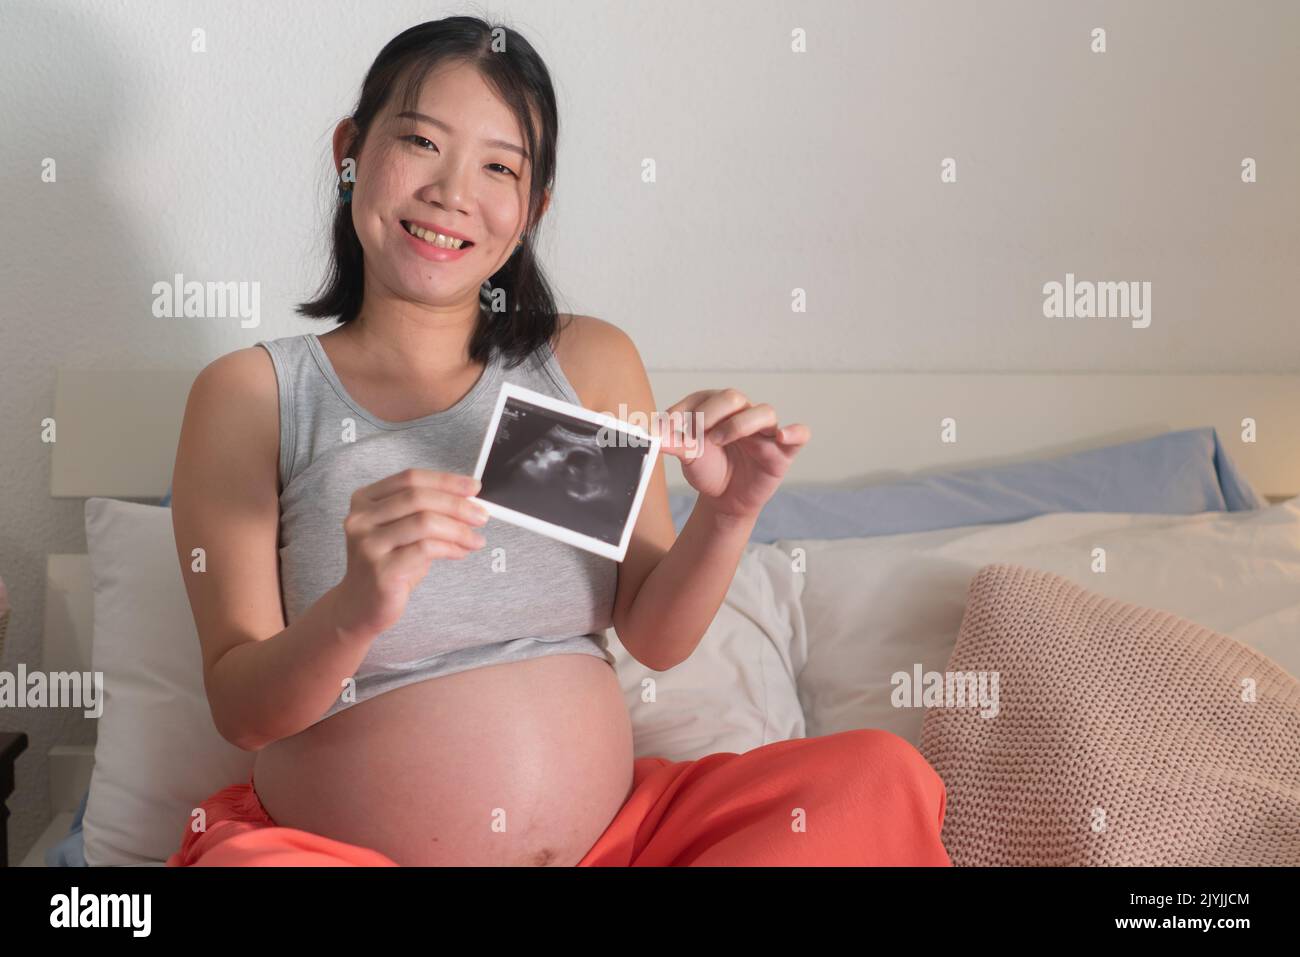 lifestyle home portrait of young happy and beautiful Asian Chinese woman pregnant sitting on bed holding ultrasound photo excited in pregnancy and mat Stock Photo